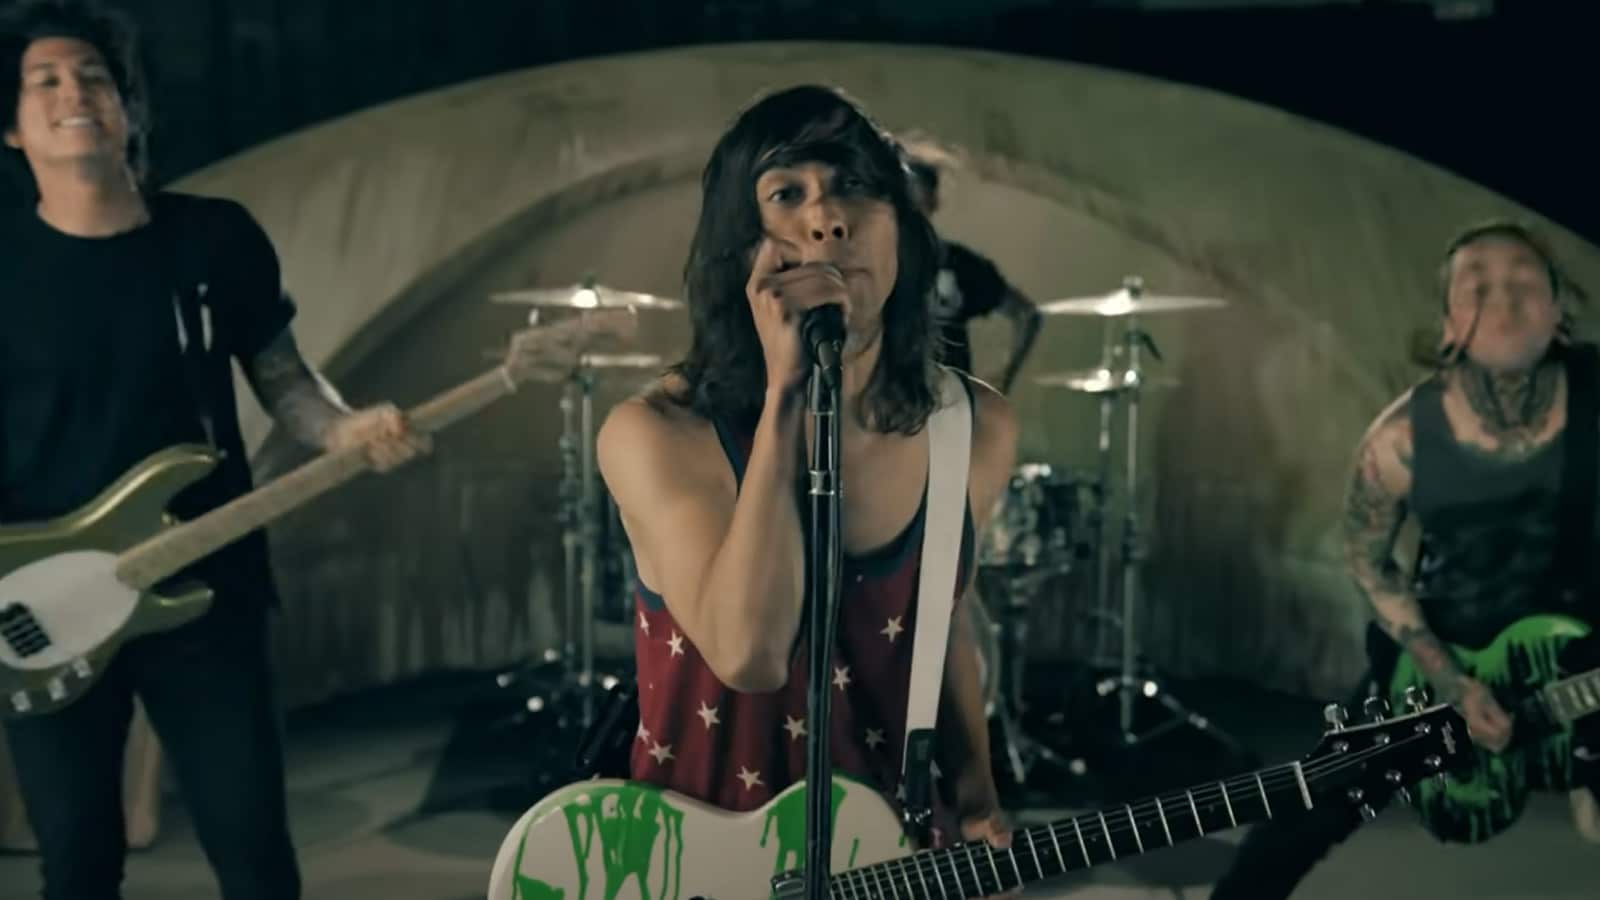 Pierce The Veil singing king for a day